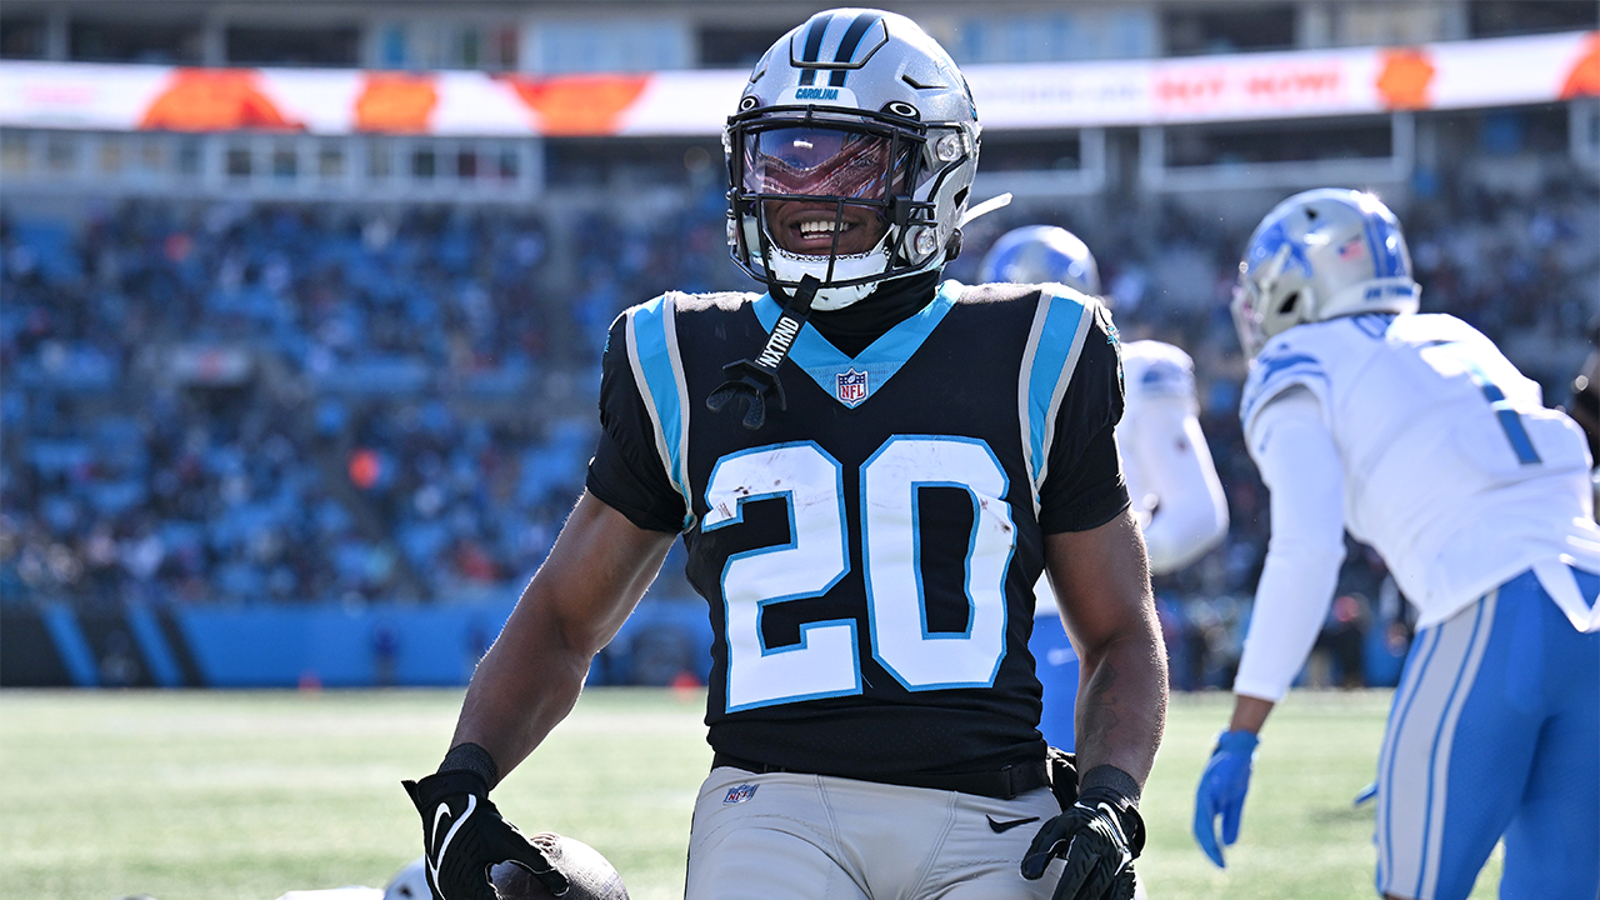 Panthers accumulate 320 rushing yards in victory over Lions